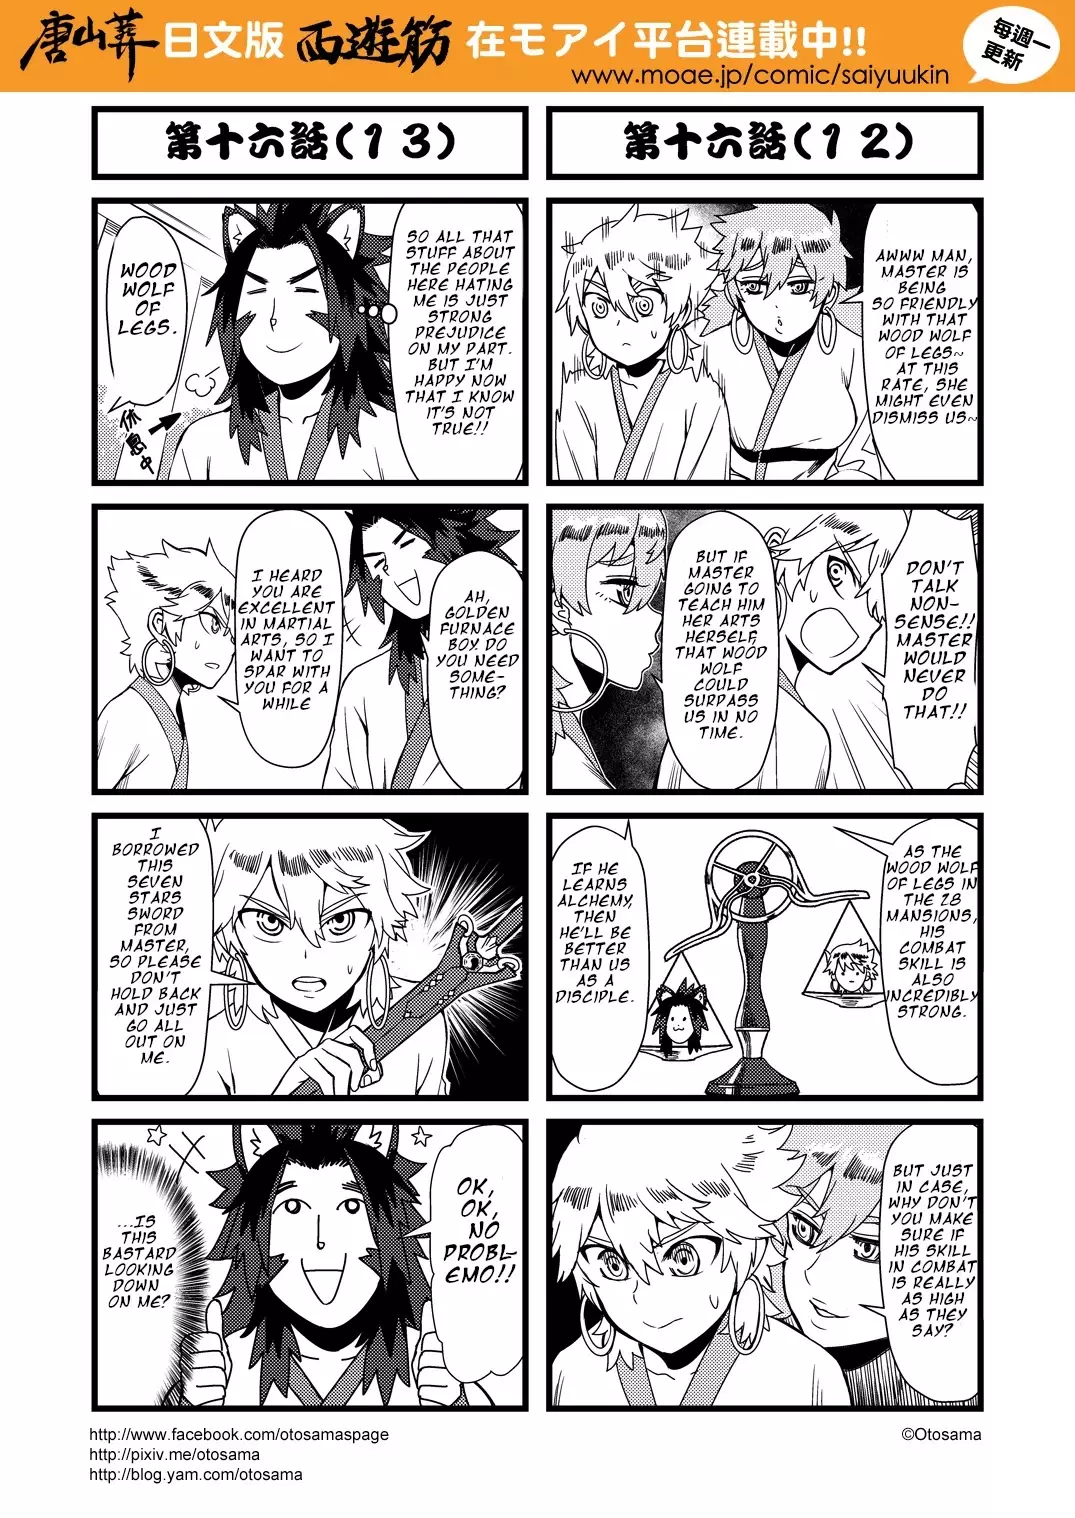 Tang Hill Burial - Journey To The West Irresponsible Anything Goes Edition - 16 page 7-a9eb15a5